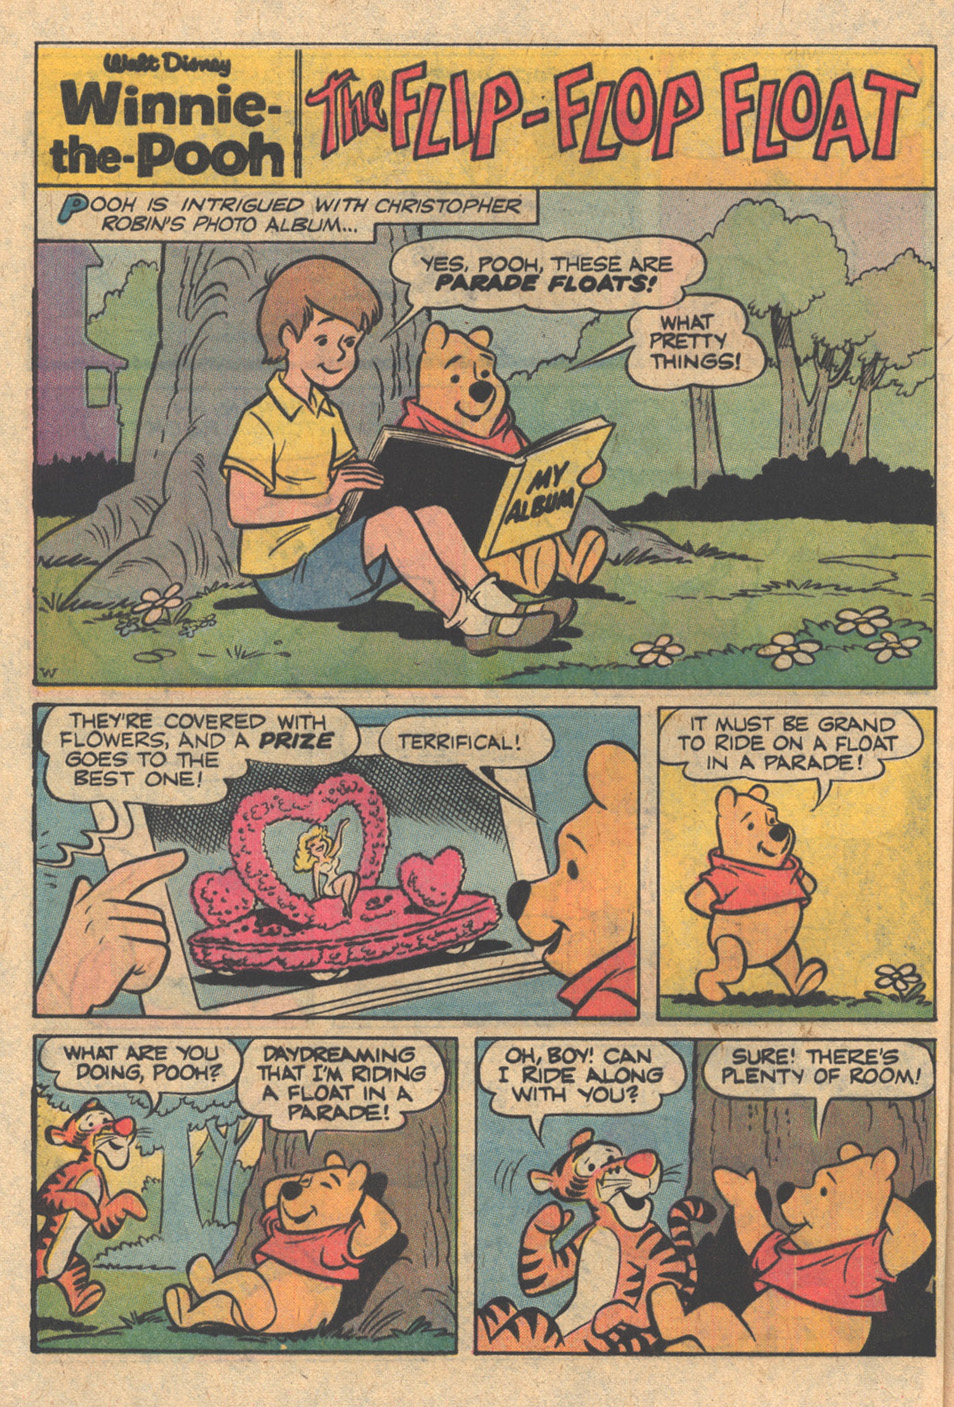 Read online Winnie-the-Pooh comic -  Issue #3 - 28